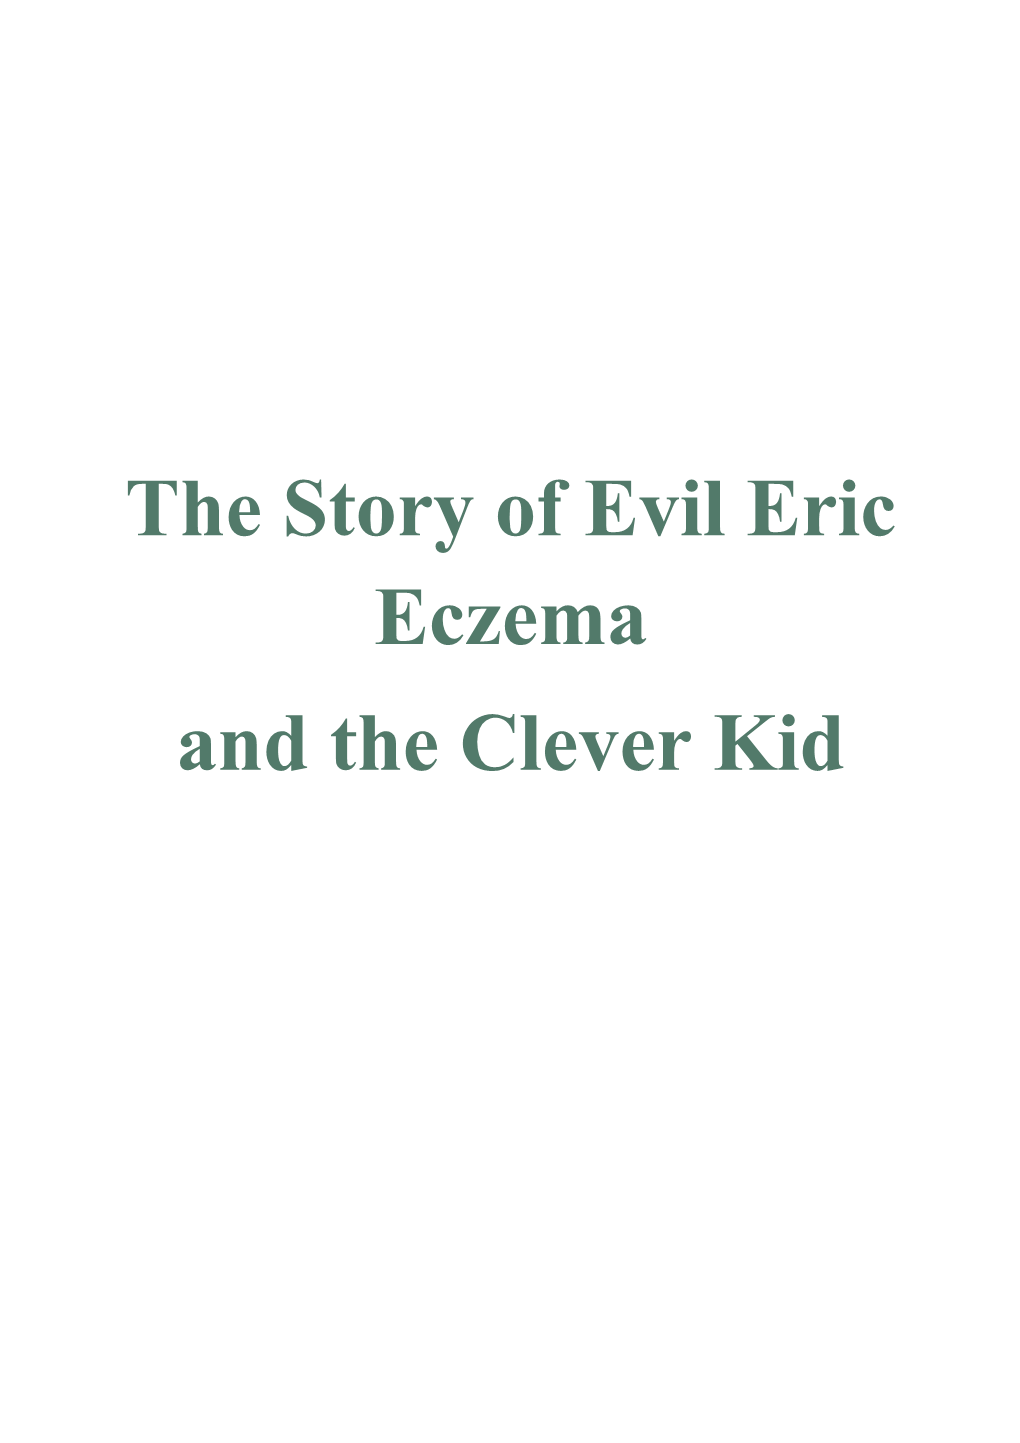 The Story of Evil Eric Eczema